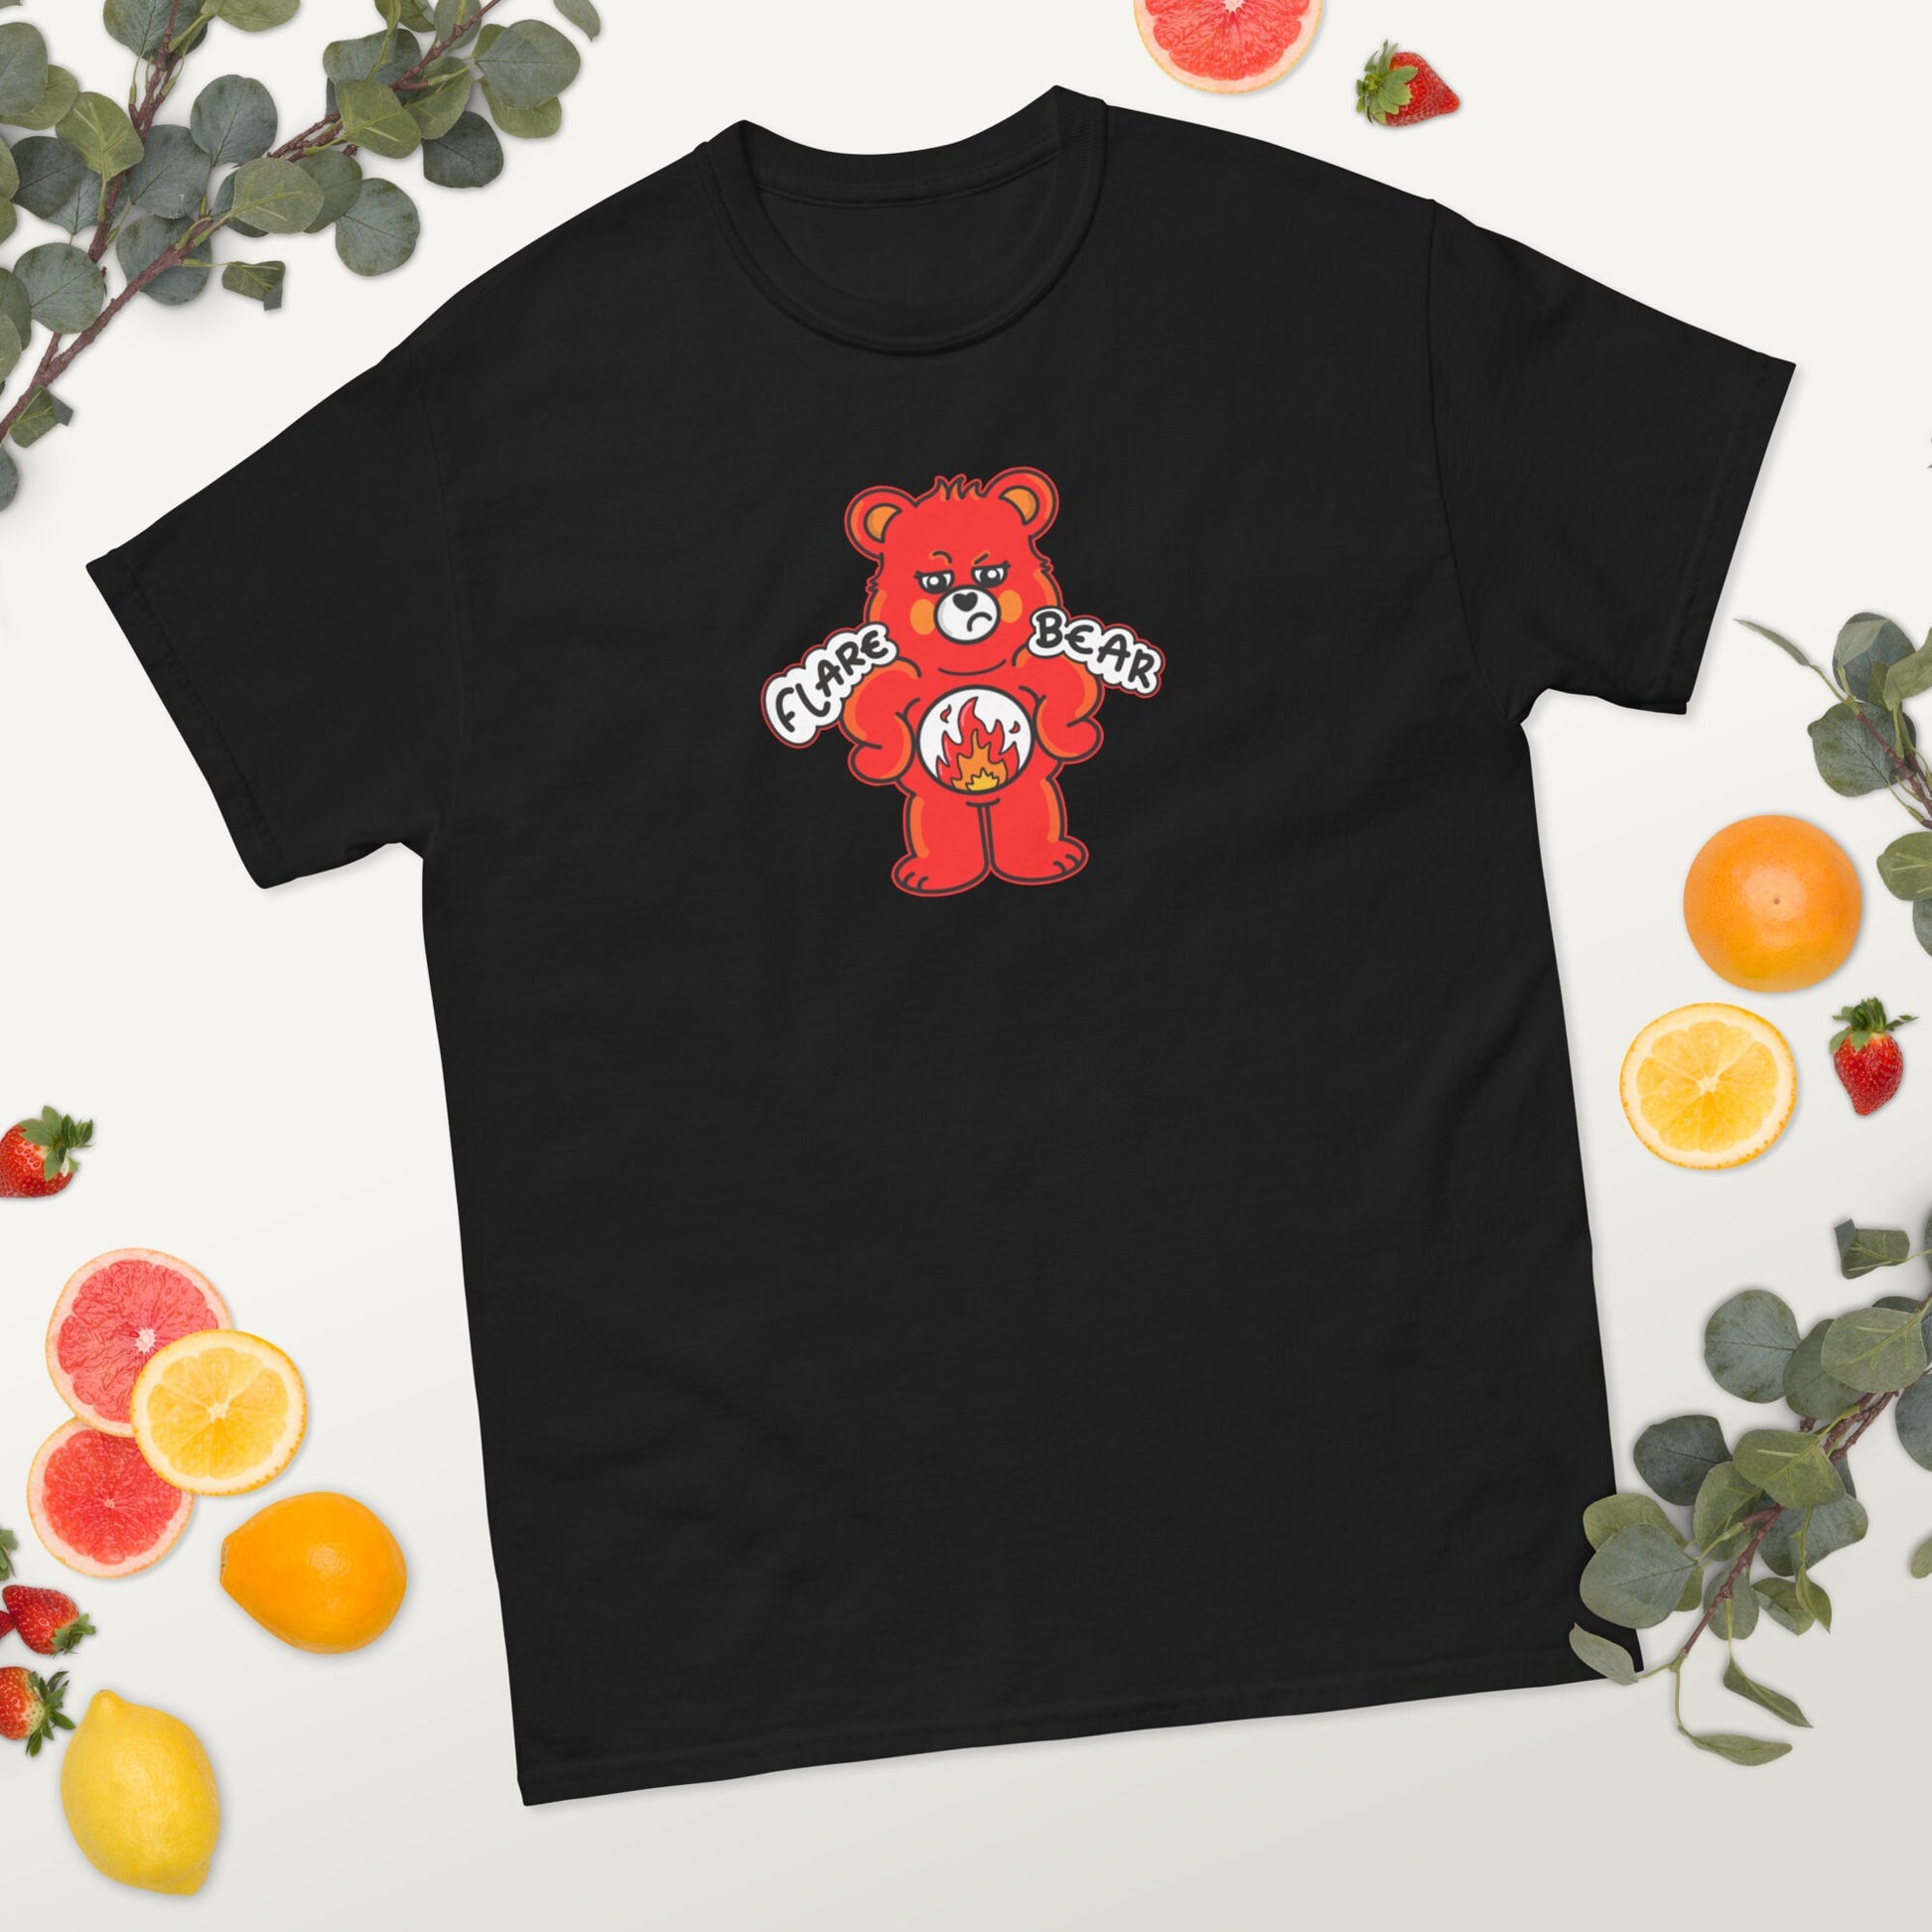 Flare Bear T-shirt a white background with fruit slices and foliage. The black short sleeve tshirt is of a red bear with a fed up expression and hands on its hips. There is a white circle on its belly with flames inside. Flare Bear is written on the middle. The tshirt is designed to raise awareness for chronic illness flare ups.